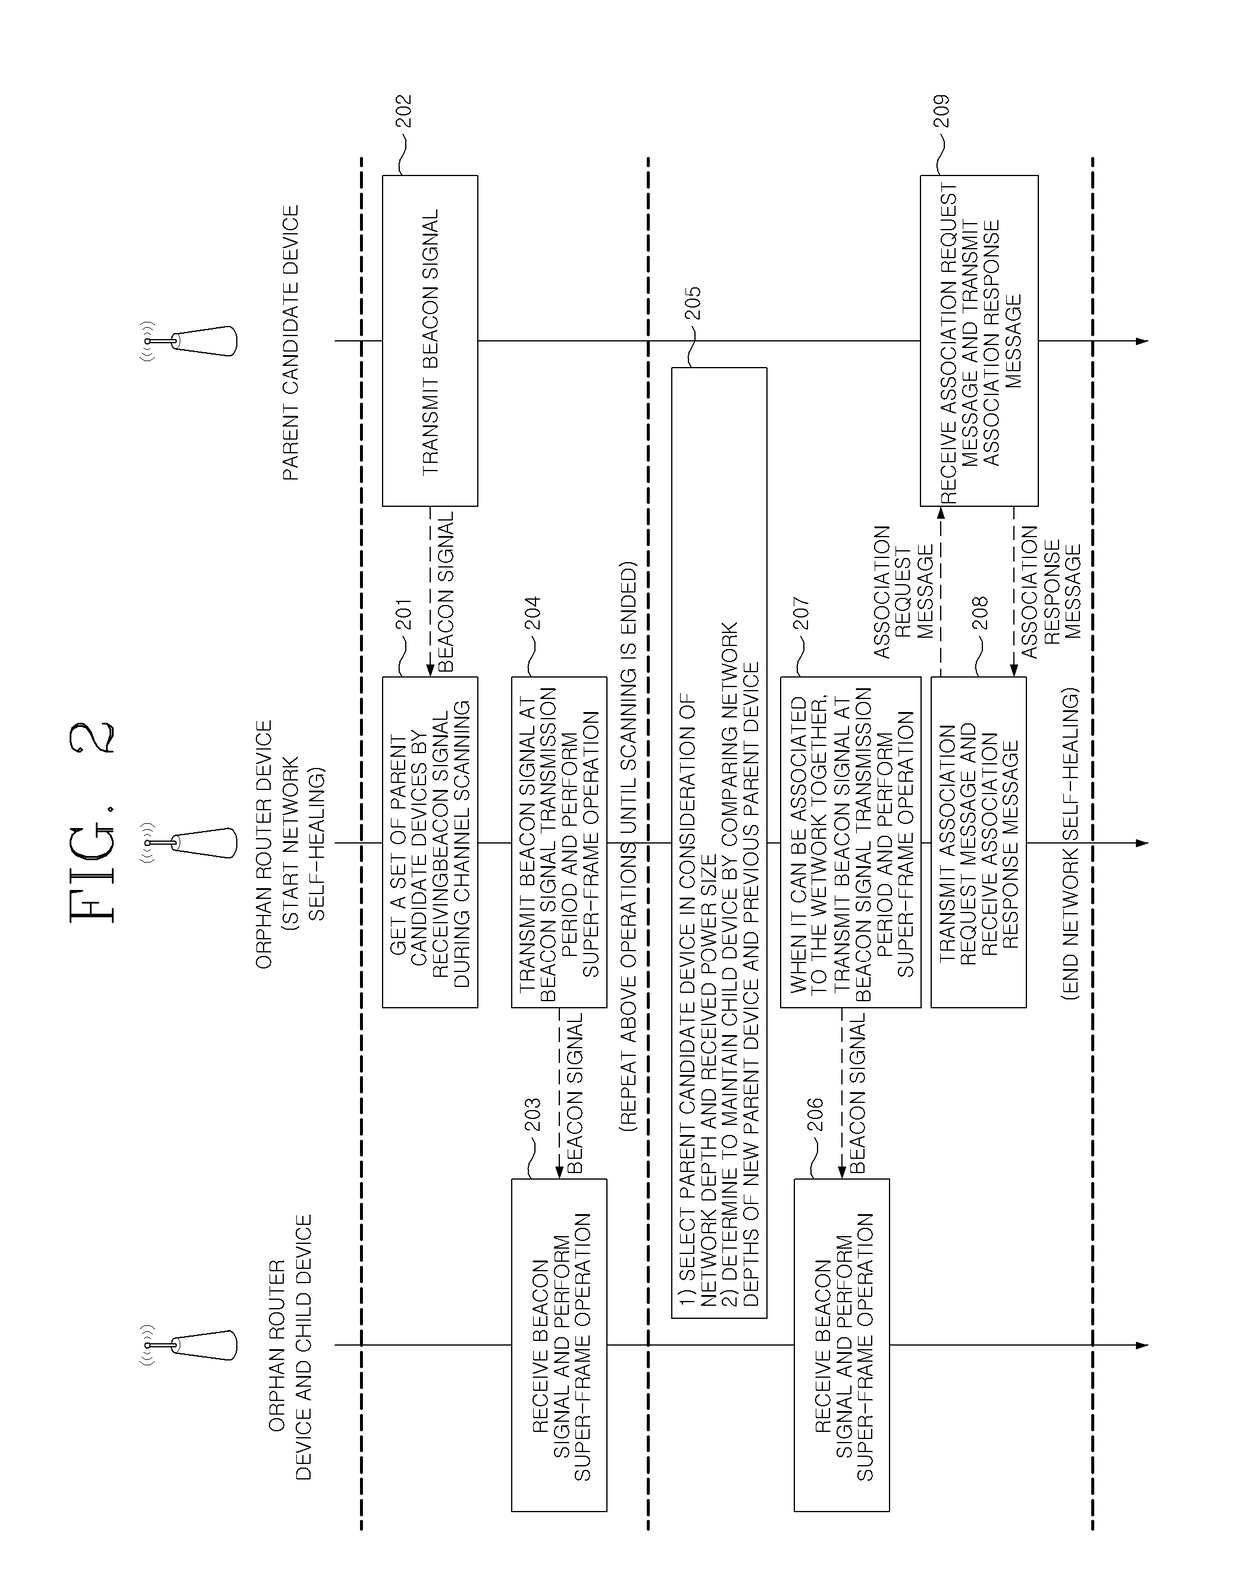 Method for Network Self-Healing in Cluster-Tree Structured Wireless Communication Networks